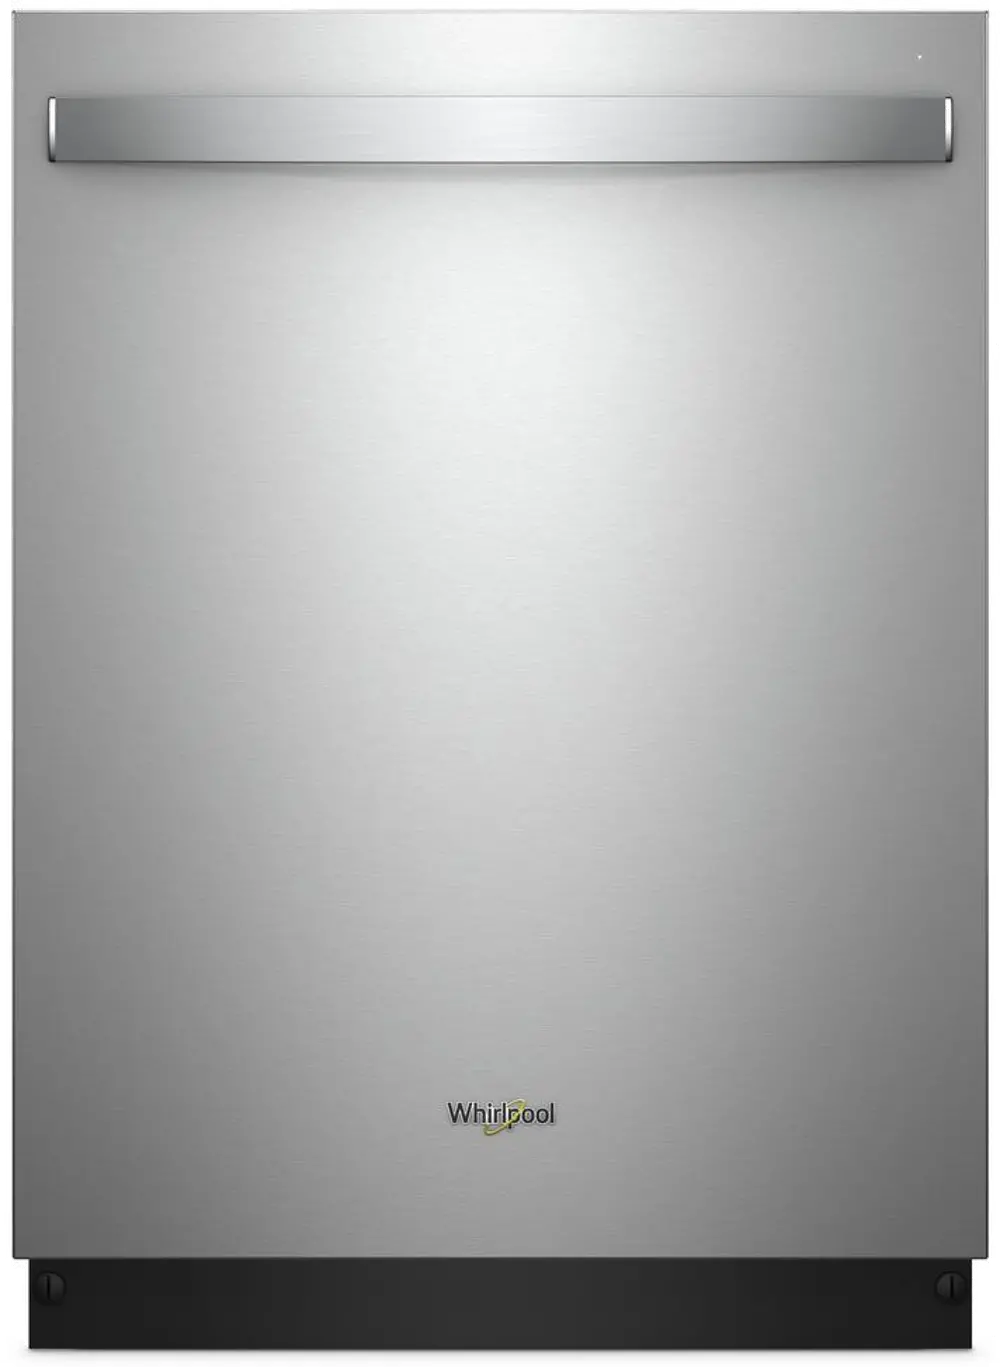 WDT730PAHZ Whirlpool Top Control Dishwasher - Stainless Steel-1